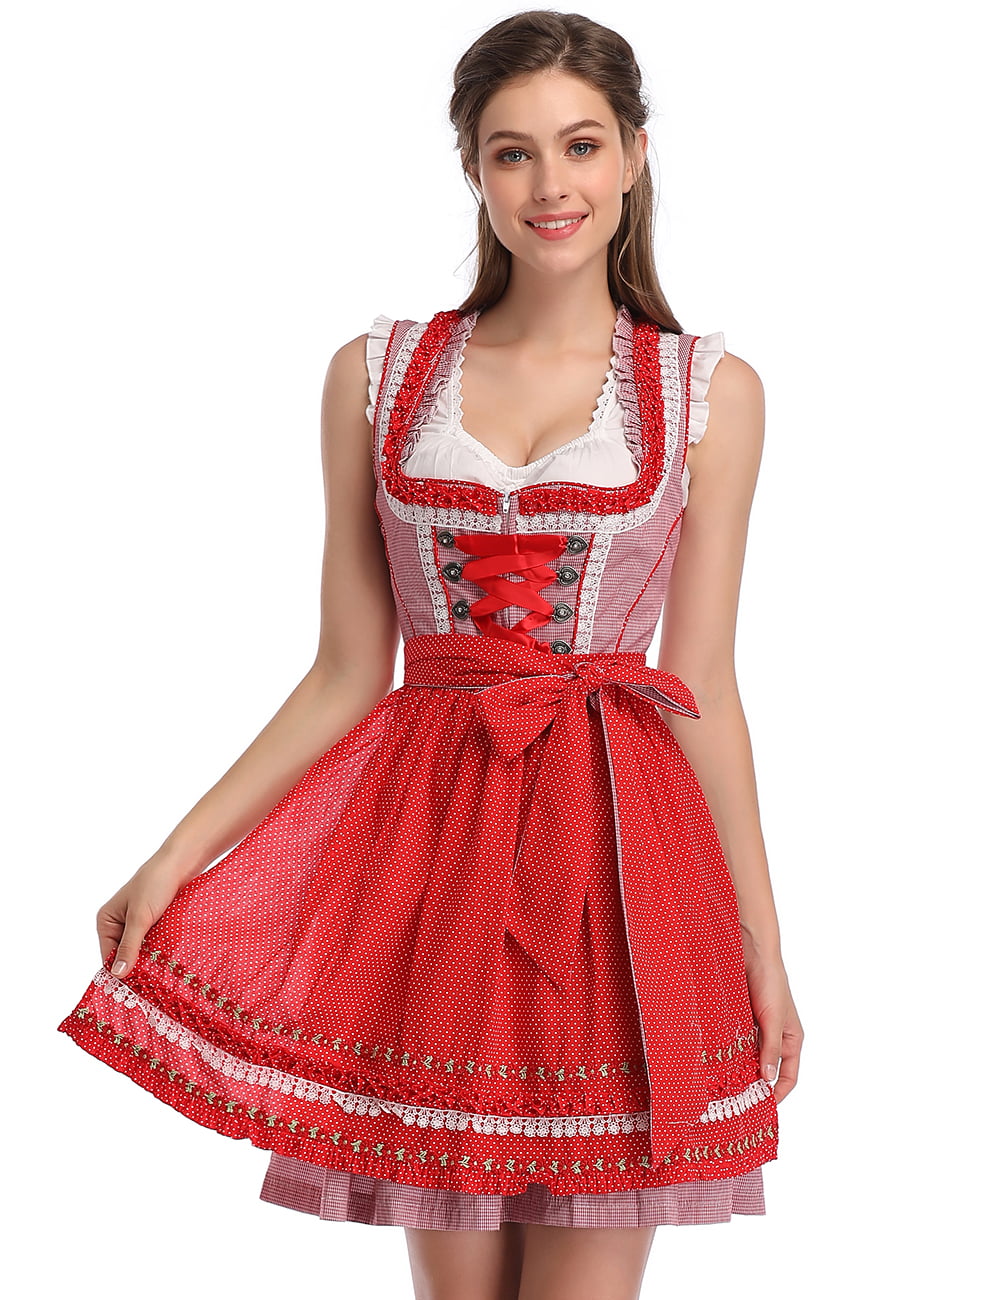 Fashion Traditional Dresses Dirndl Country Line Dirndl pink-white check pattern classic style 